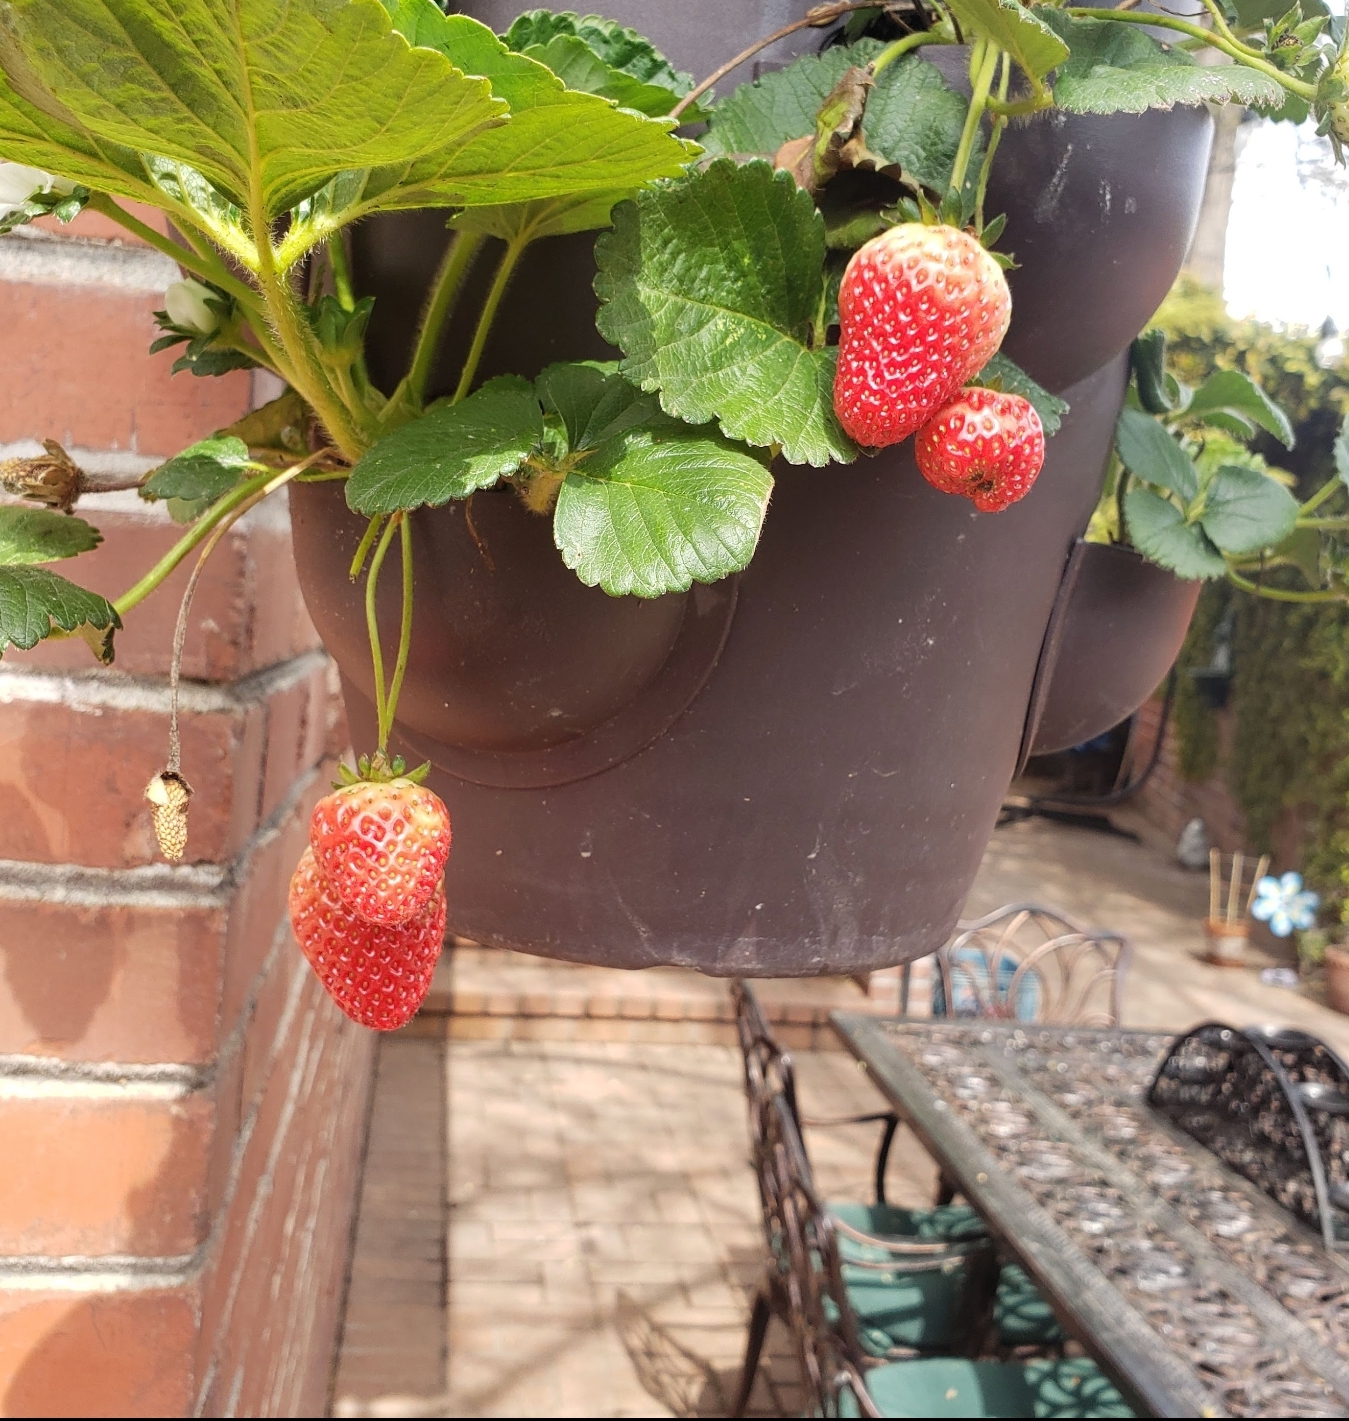 Strawberries growing out of a pot